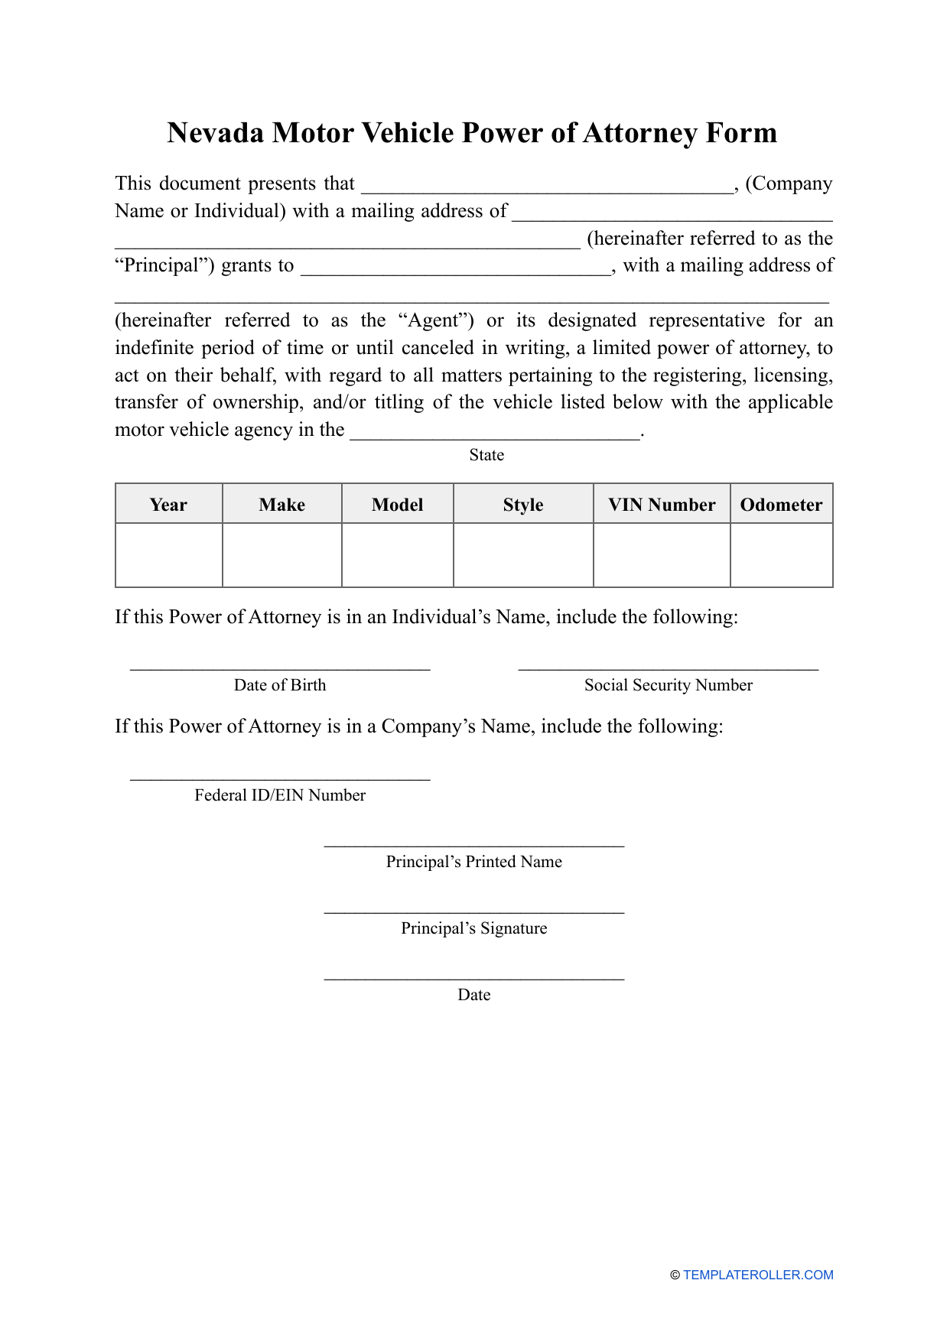 Motor Vehicle Power of Attorney Form - Nevada, Page 1